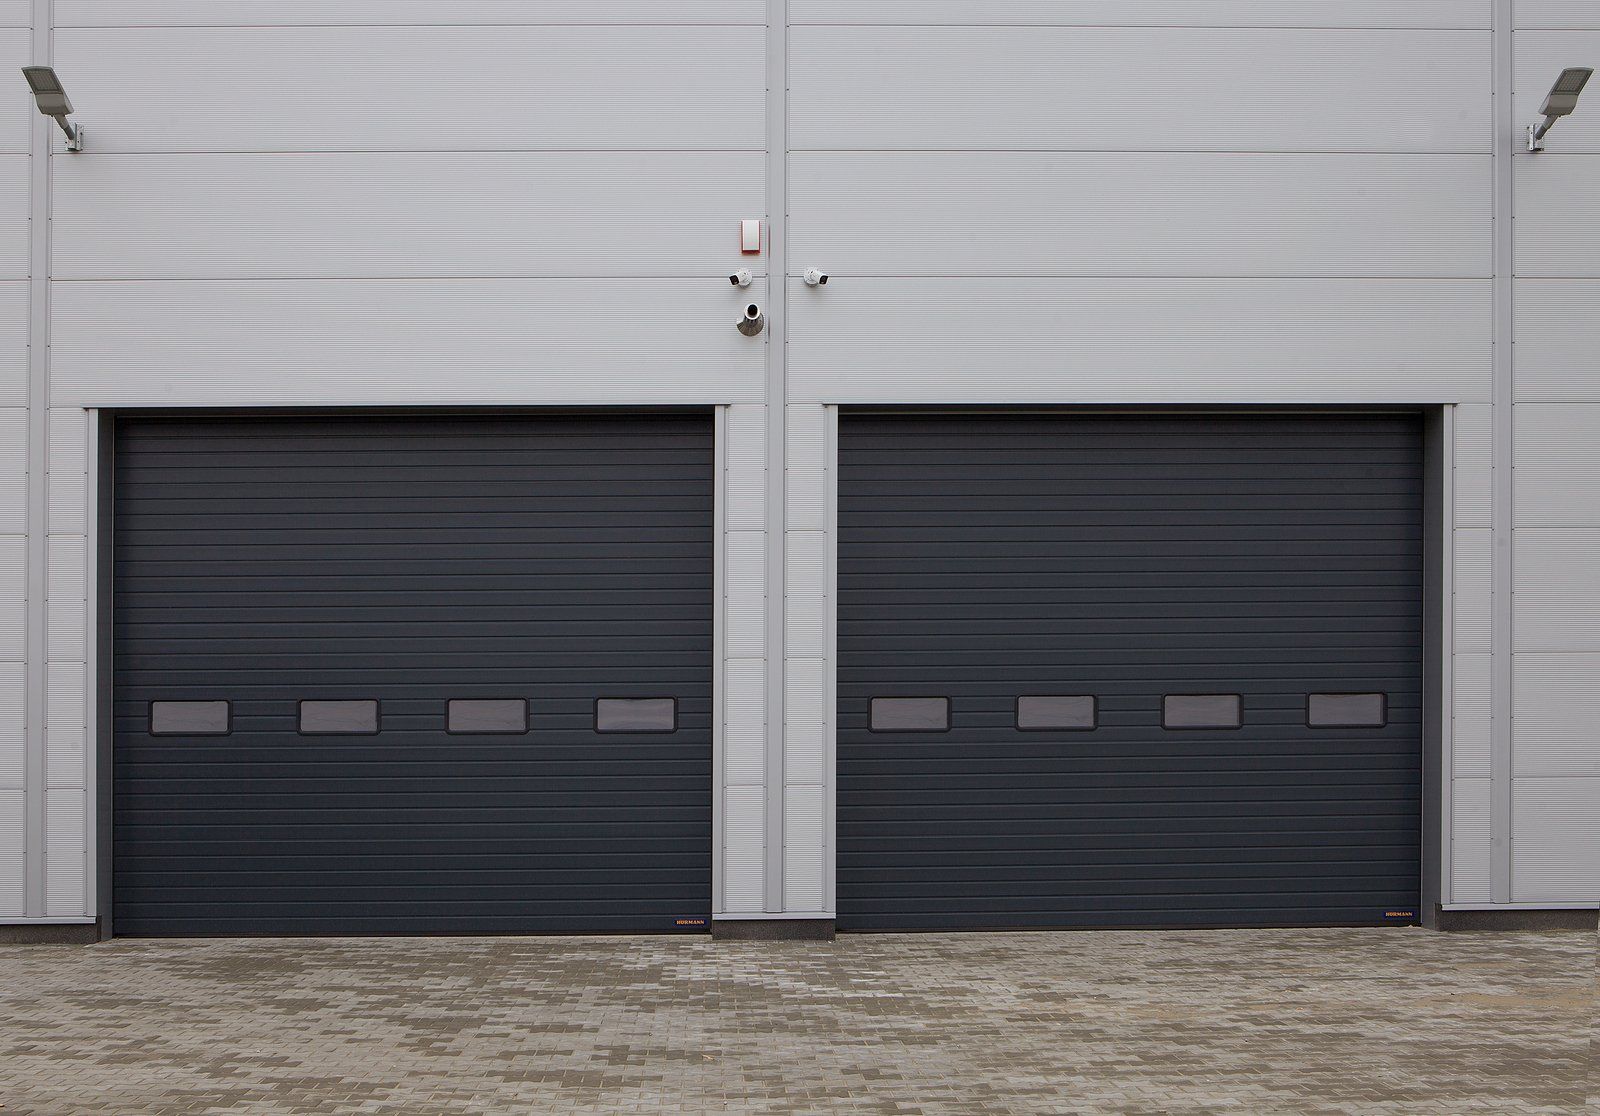 Commercial Garage Door Installation and Repair Services Near You